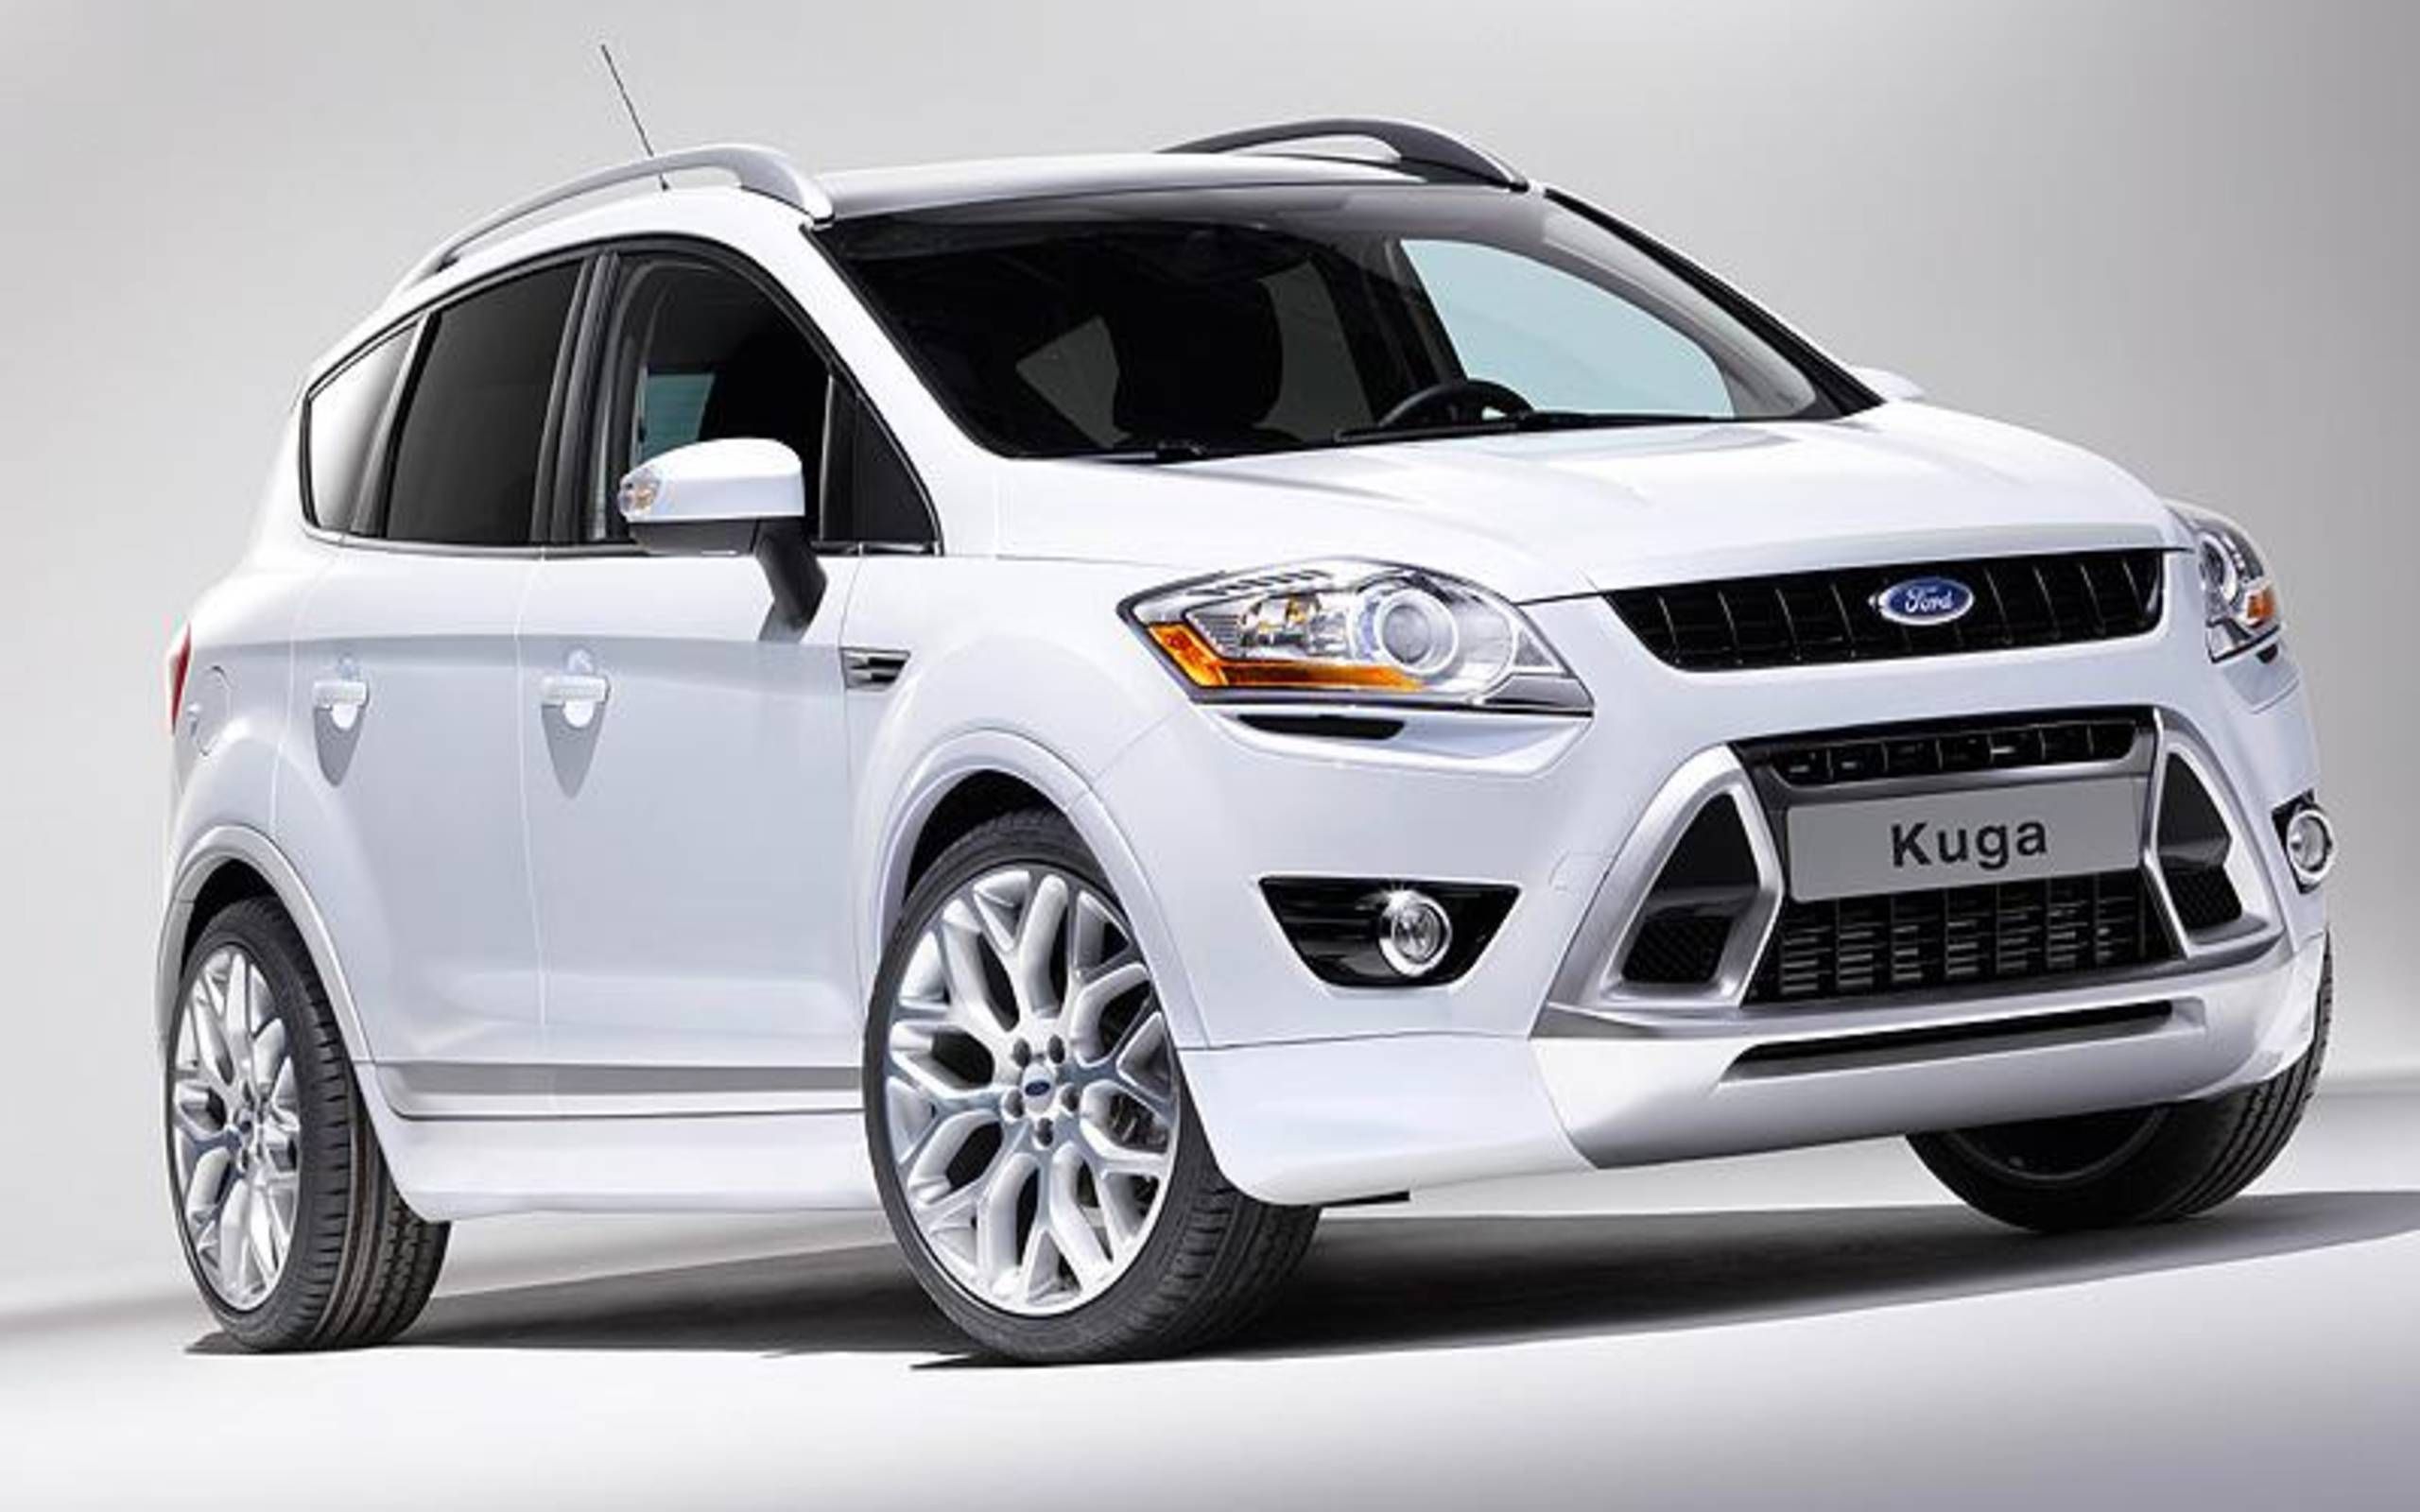 Styled Kuga: Ford shows crossover with body kit, upgraded interior in